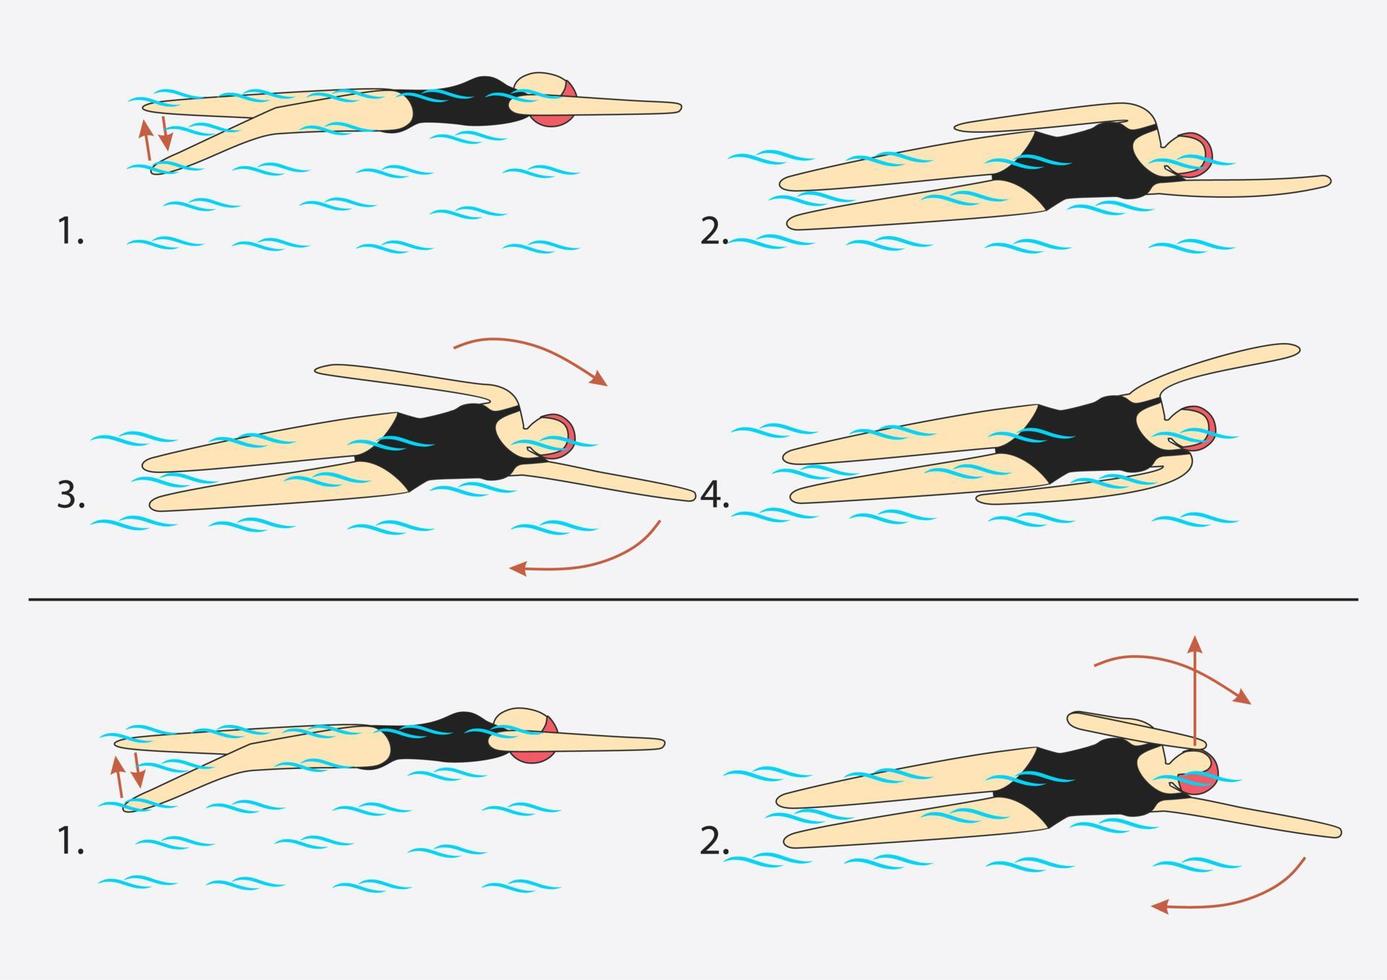 Backstroke with one arm extended forward so that the upper arm touches the ear. Turn to the side of the outstretched arm, lifting the shoulder of the lower arm out of the water. Swimming pool. vector